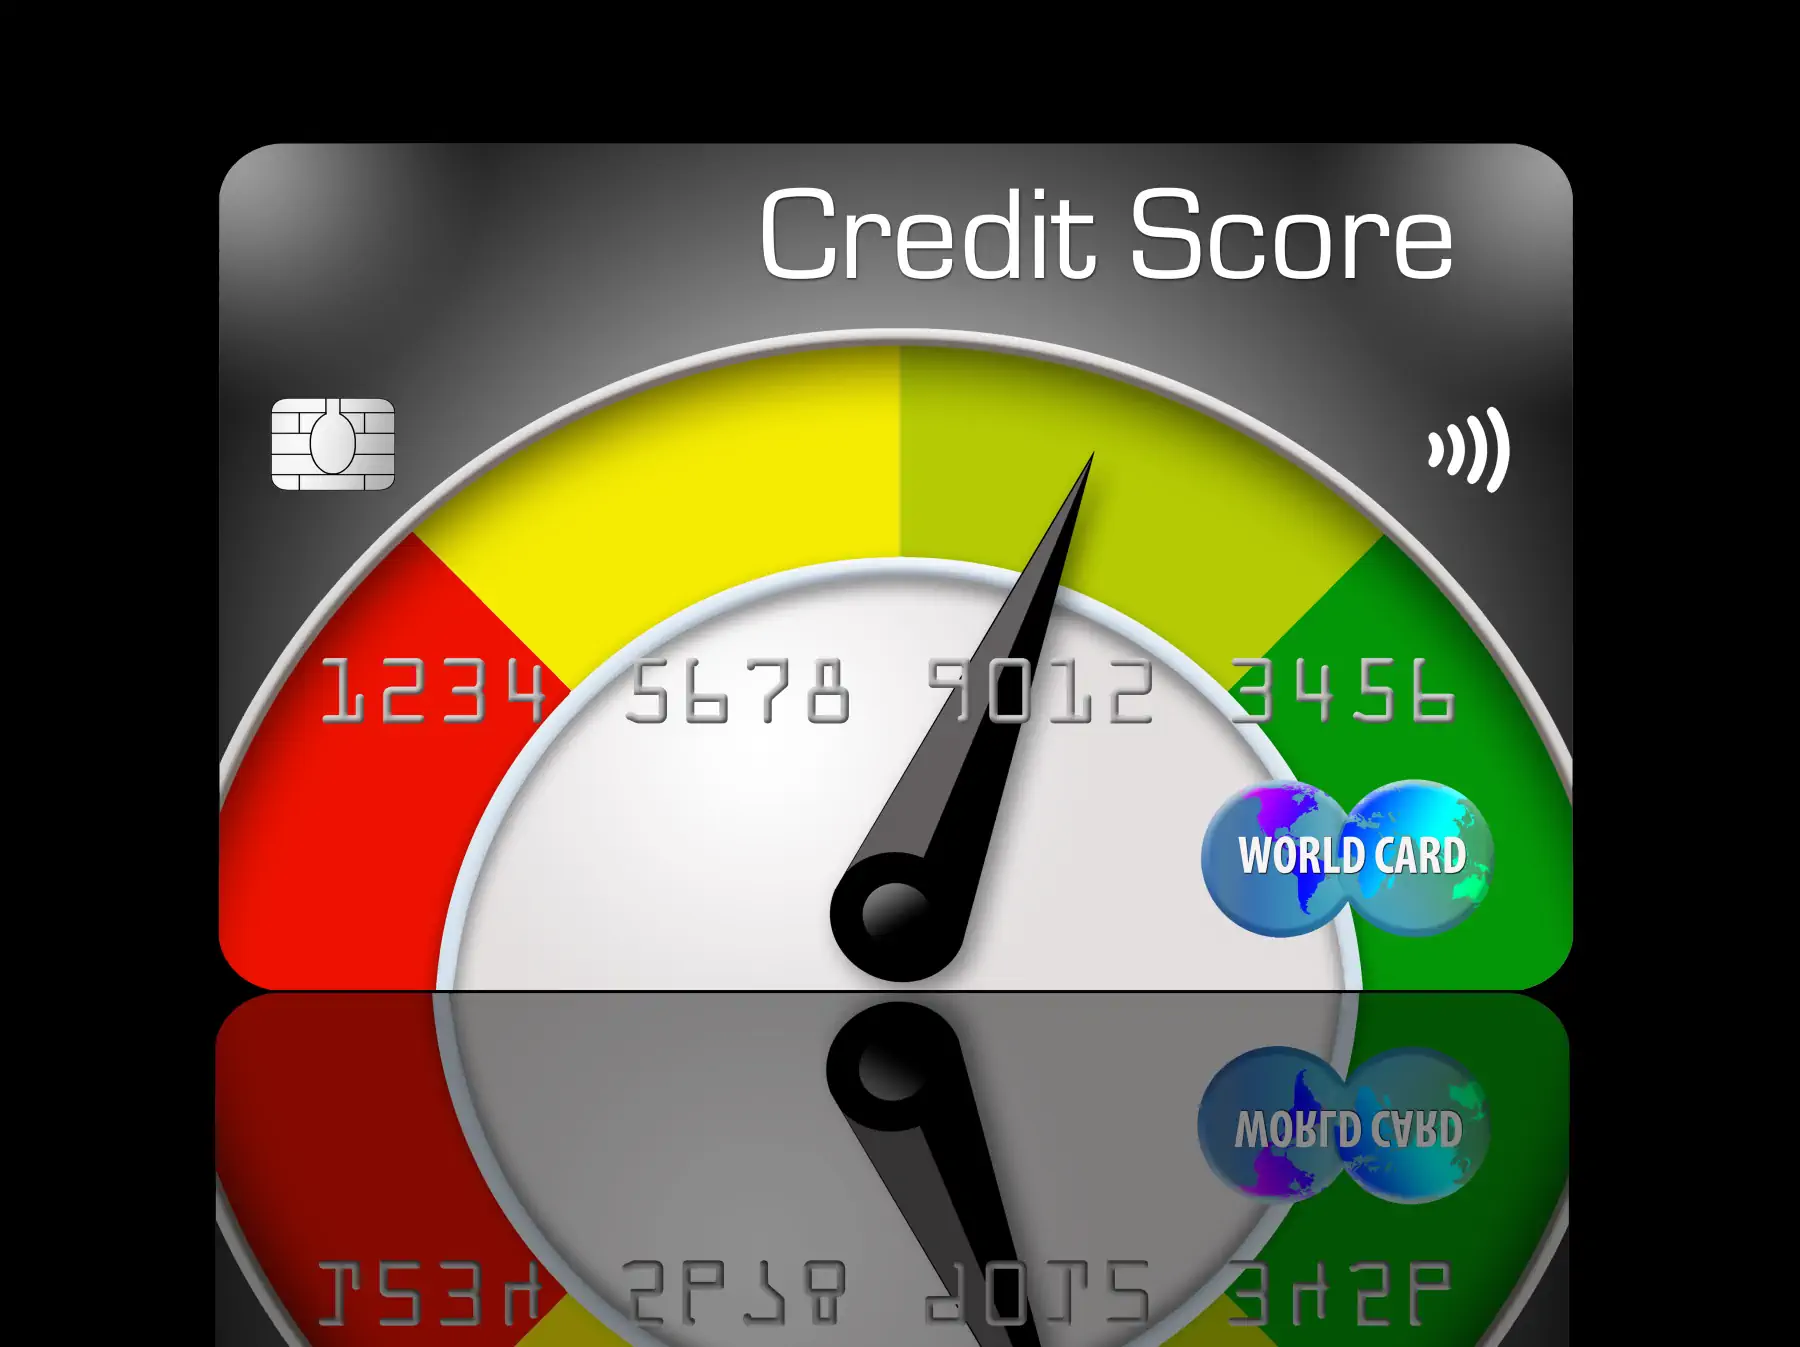 Credit Card with score dial